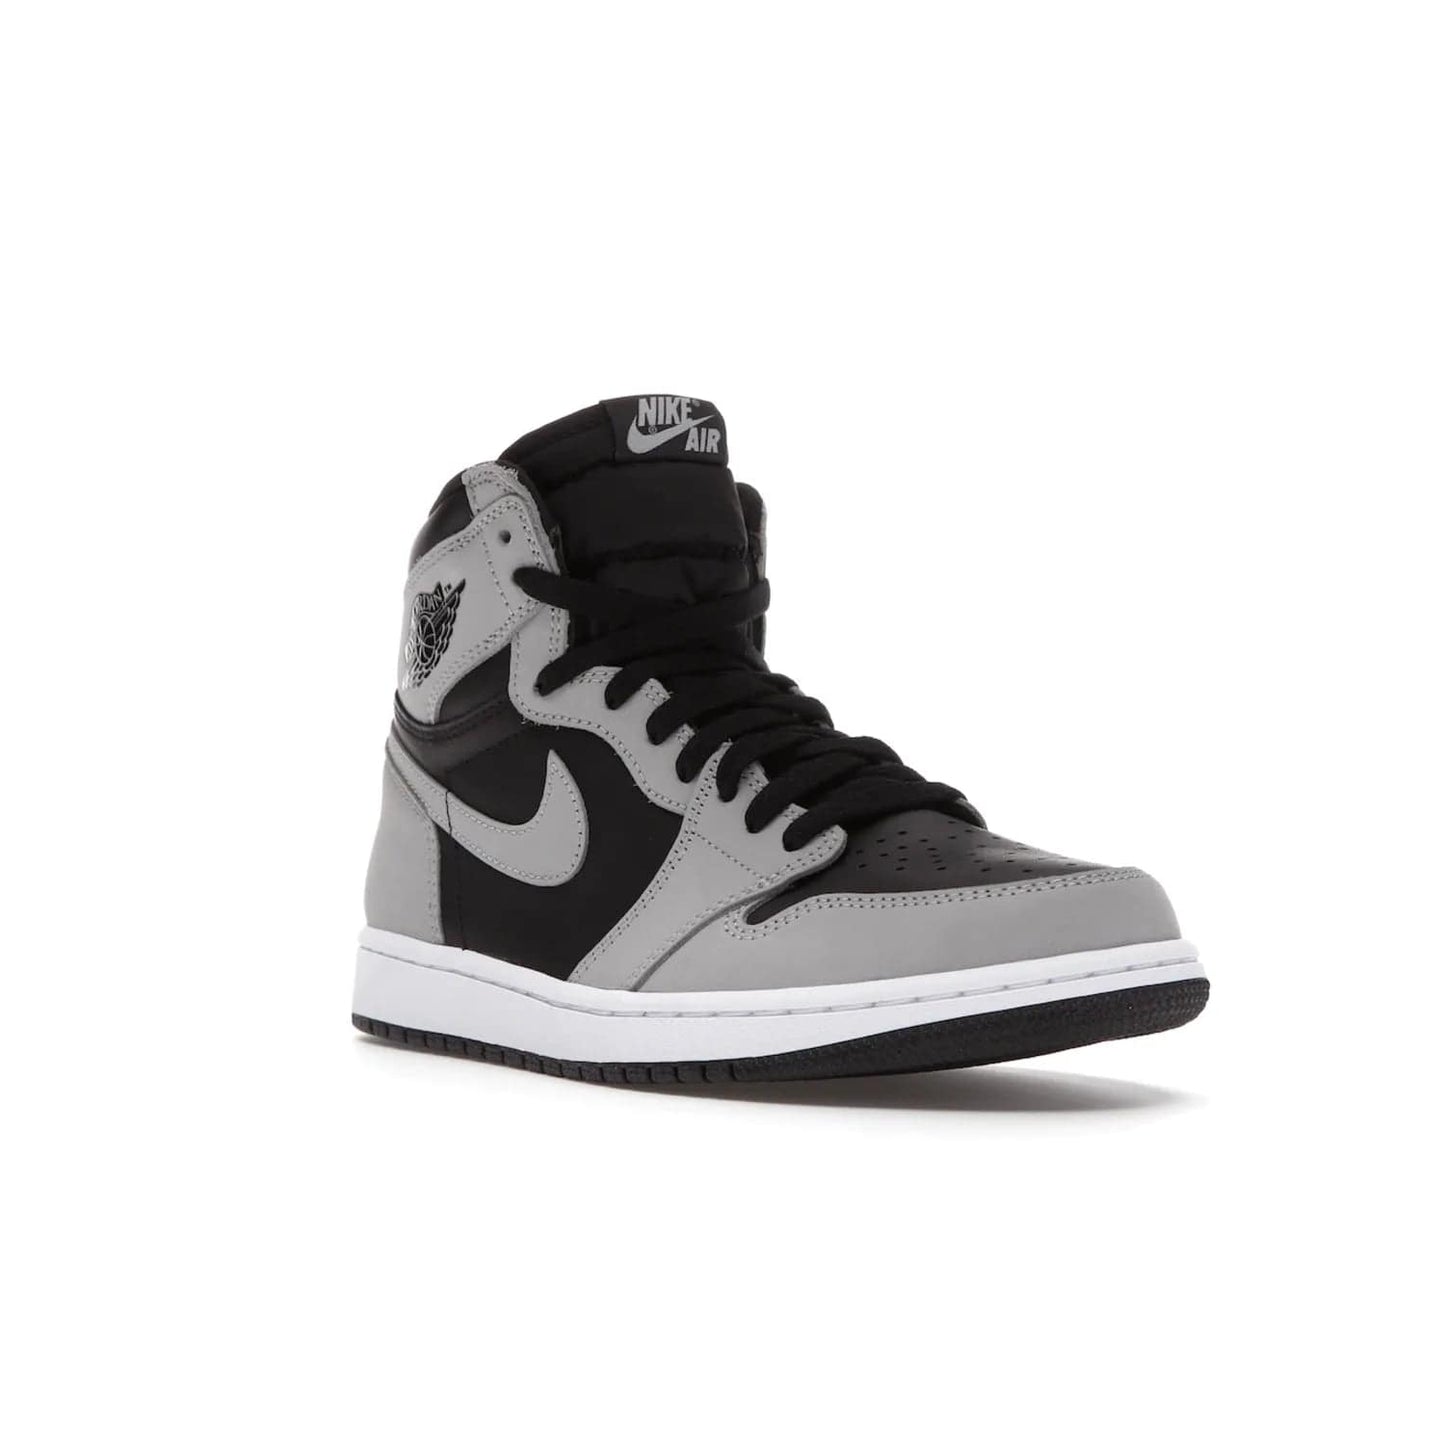 Jordan 1 Retro High Shadow 2.0 - Image 6 - Only at www.BallersClubKickz.com - #
Classic Air Jordan 1 Retro High Shadow 2.0 with black leather base and Light Smoke Grey overlays. Released in May 2021.